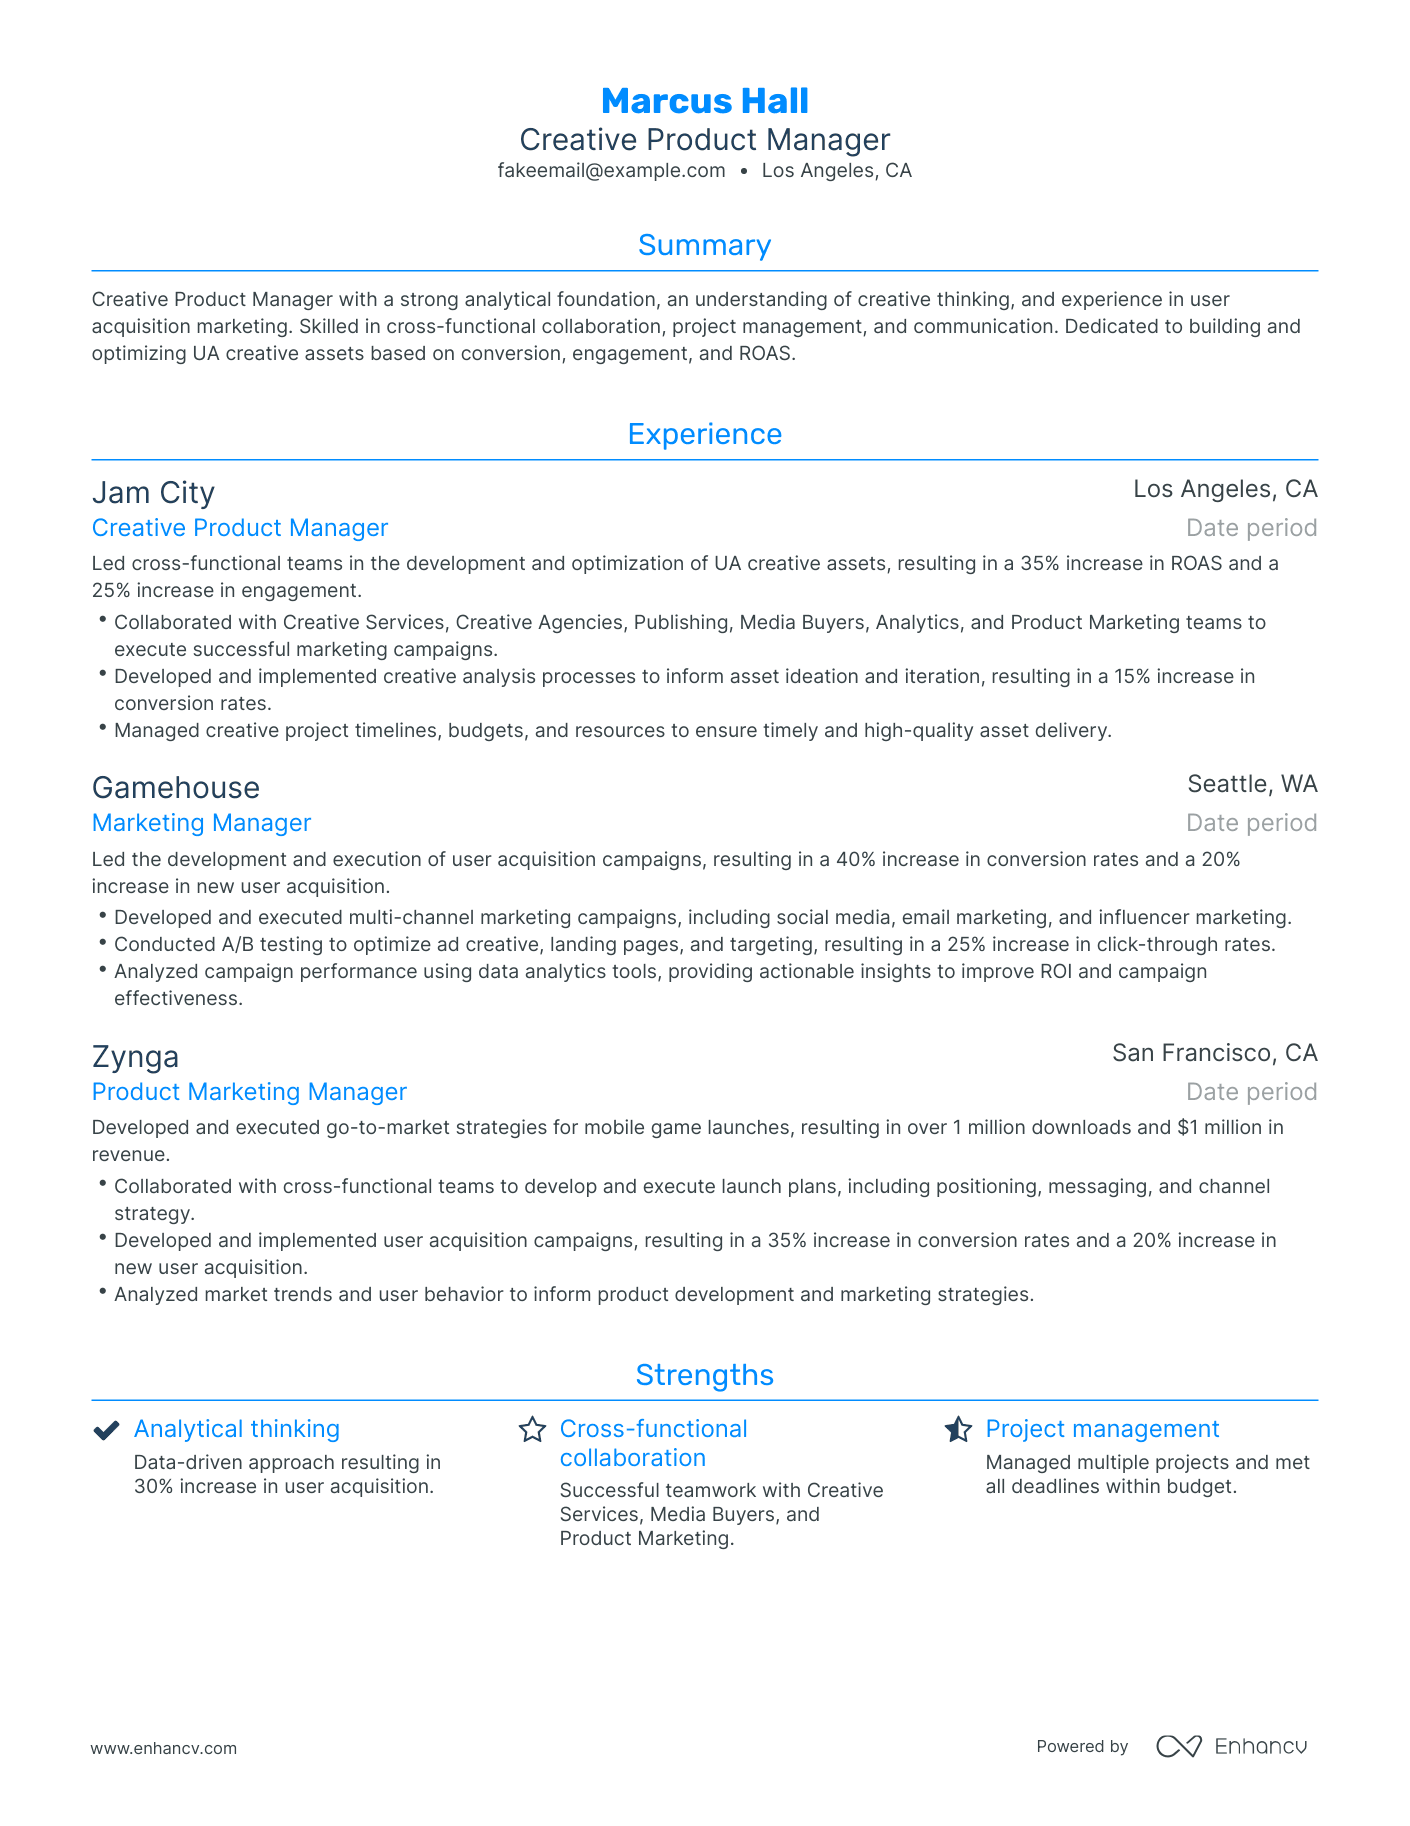 Traditional Creative Product Manager Resume Template